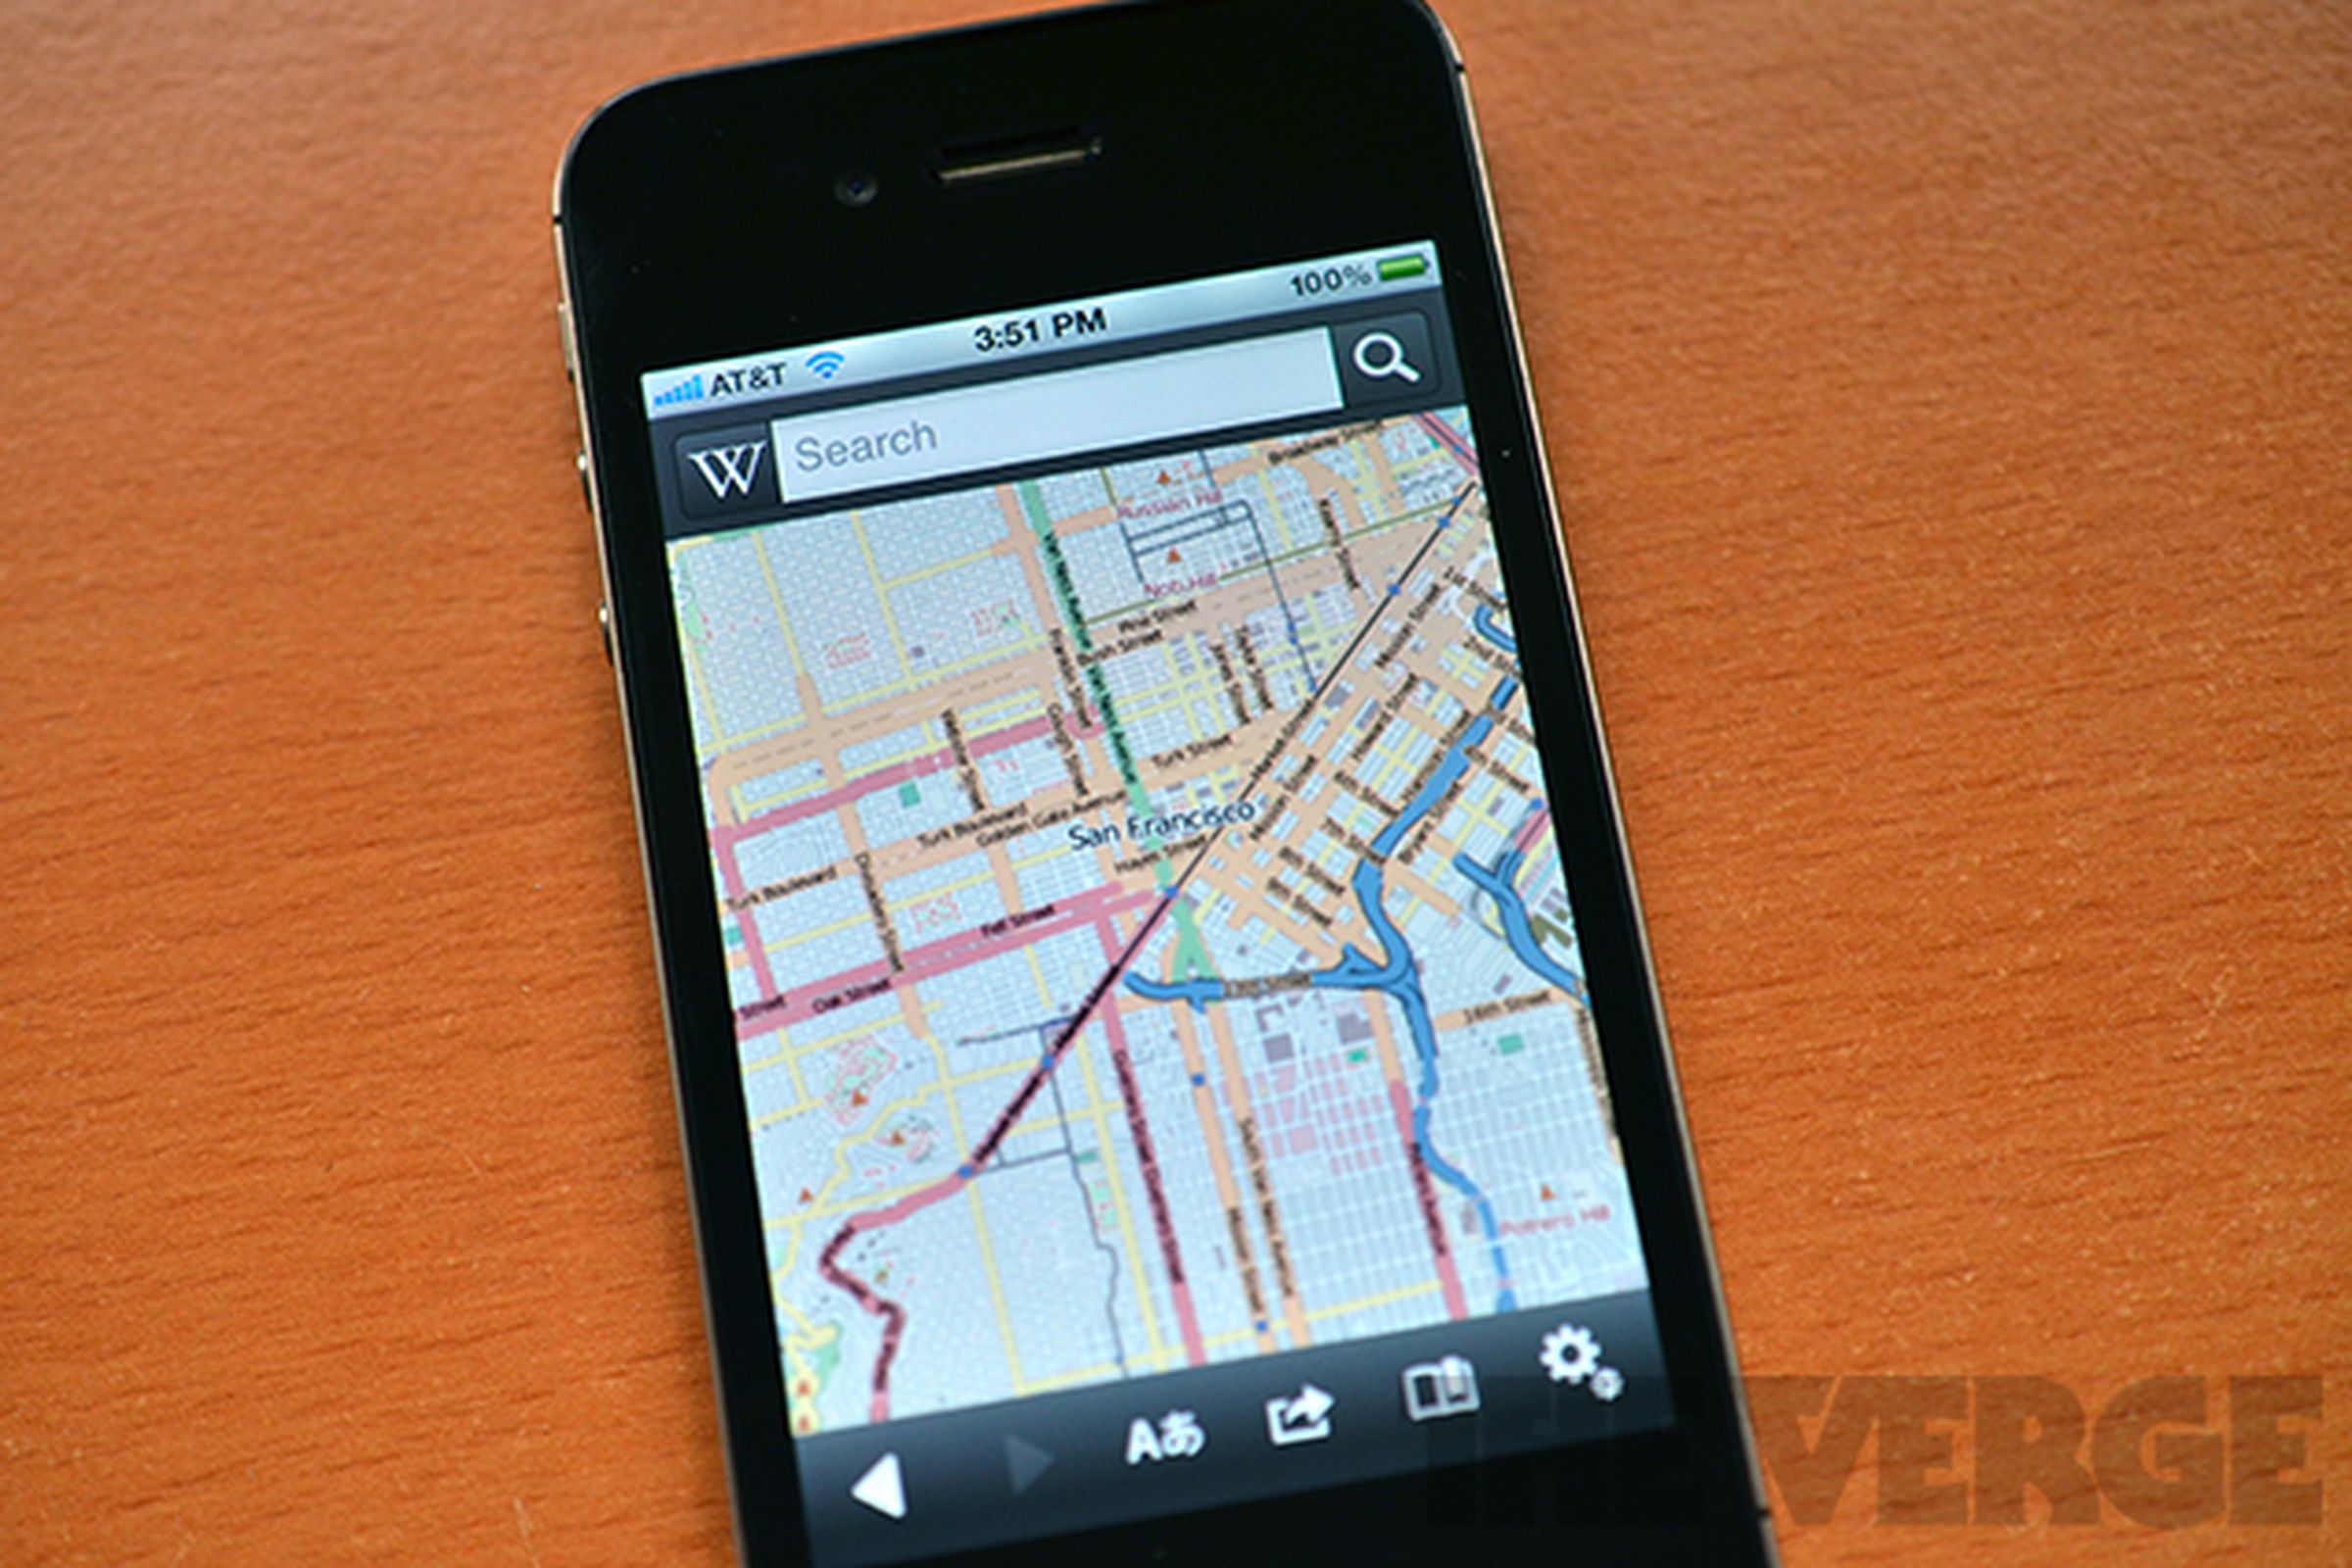 Wikipedia for iOS update with OpenStreetMap